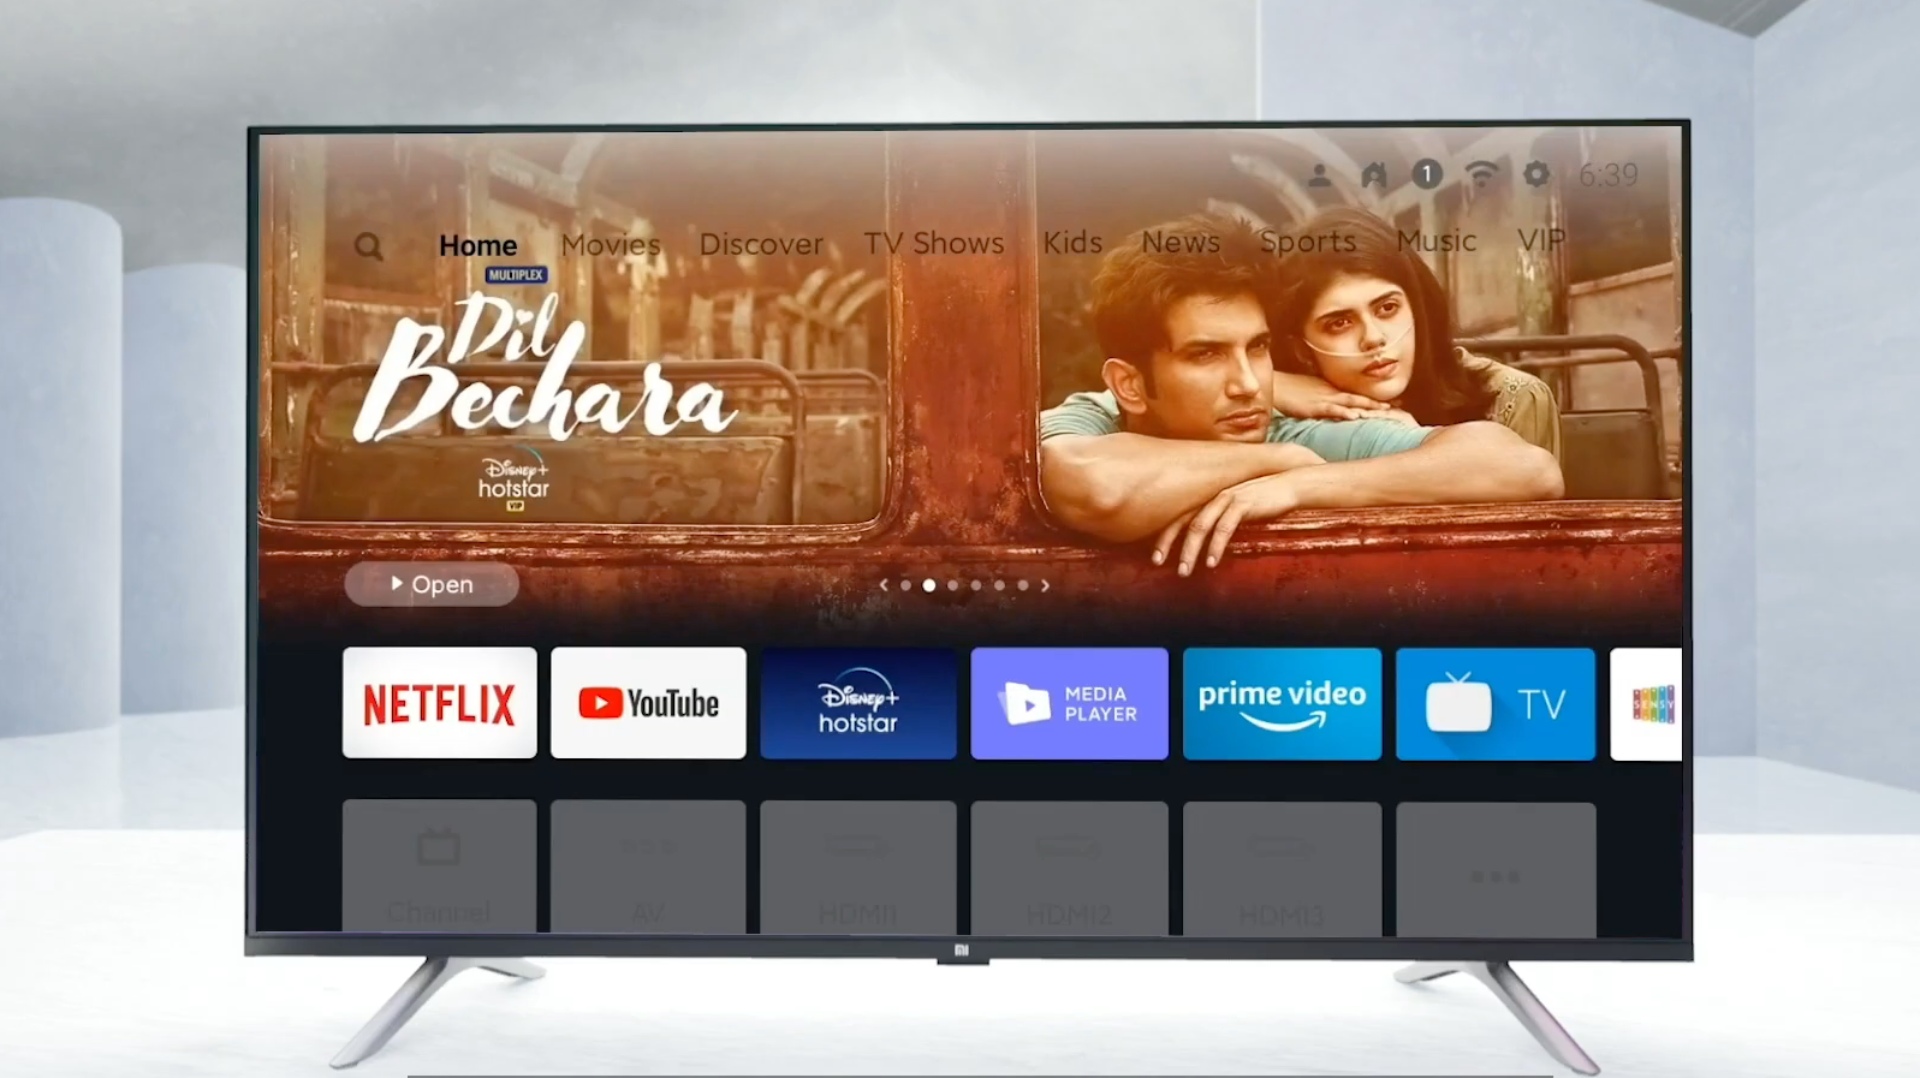 An image showing the display of the Xiaomi Mi TV 4A Horizon Edition